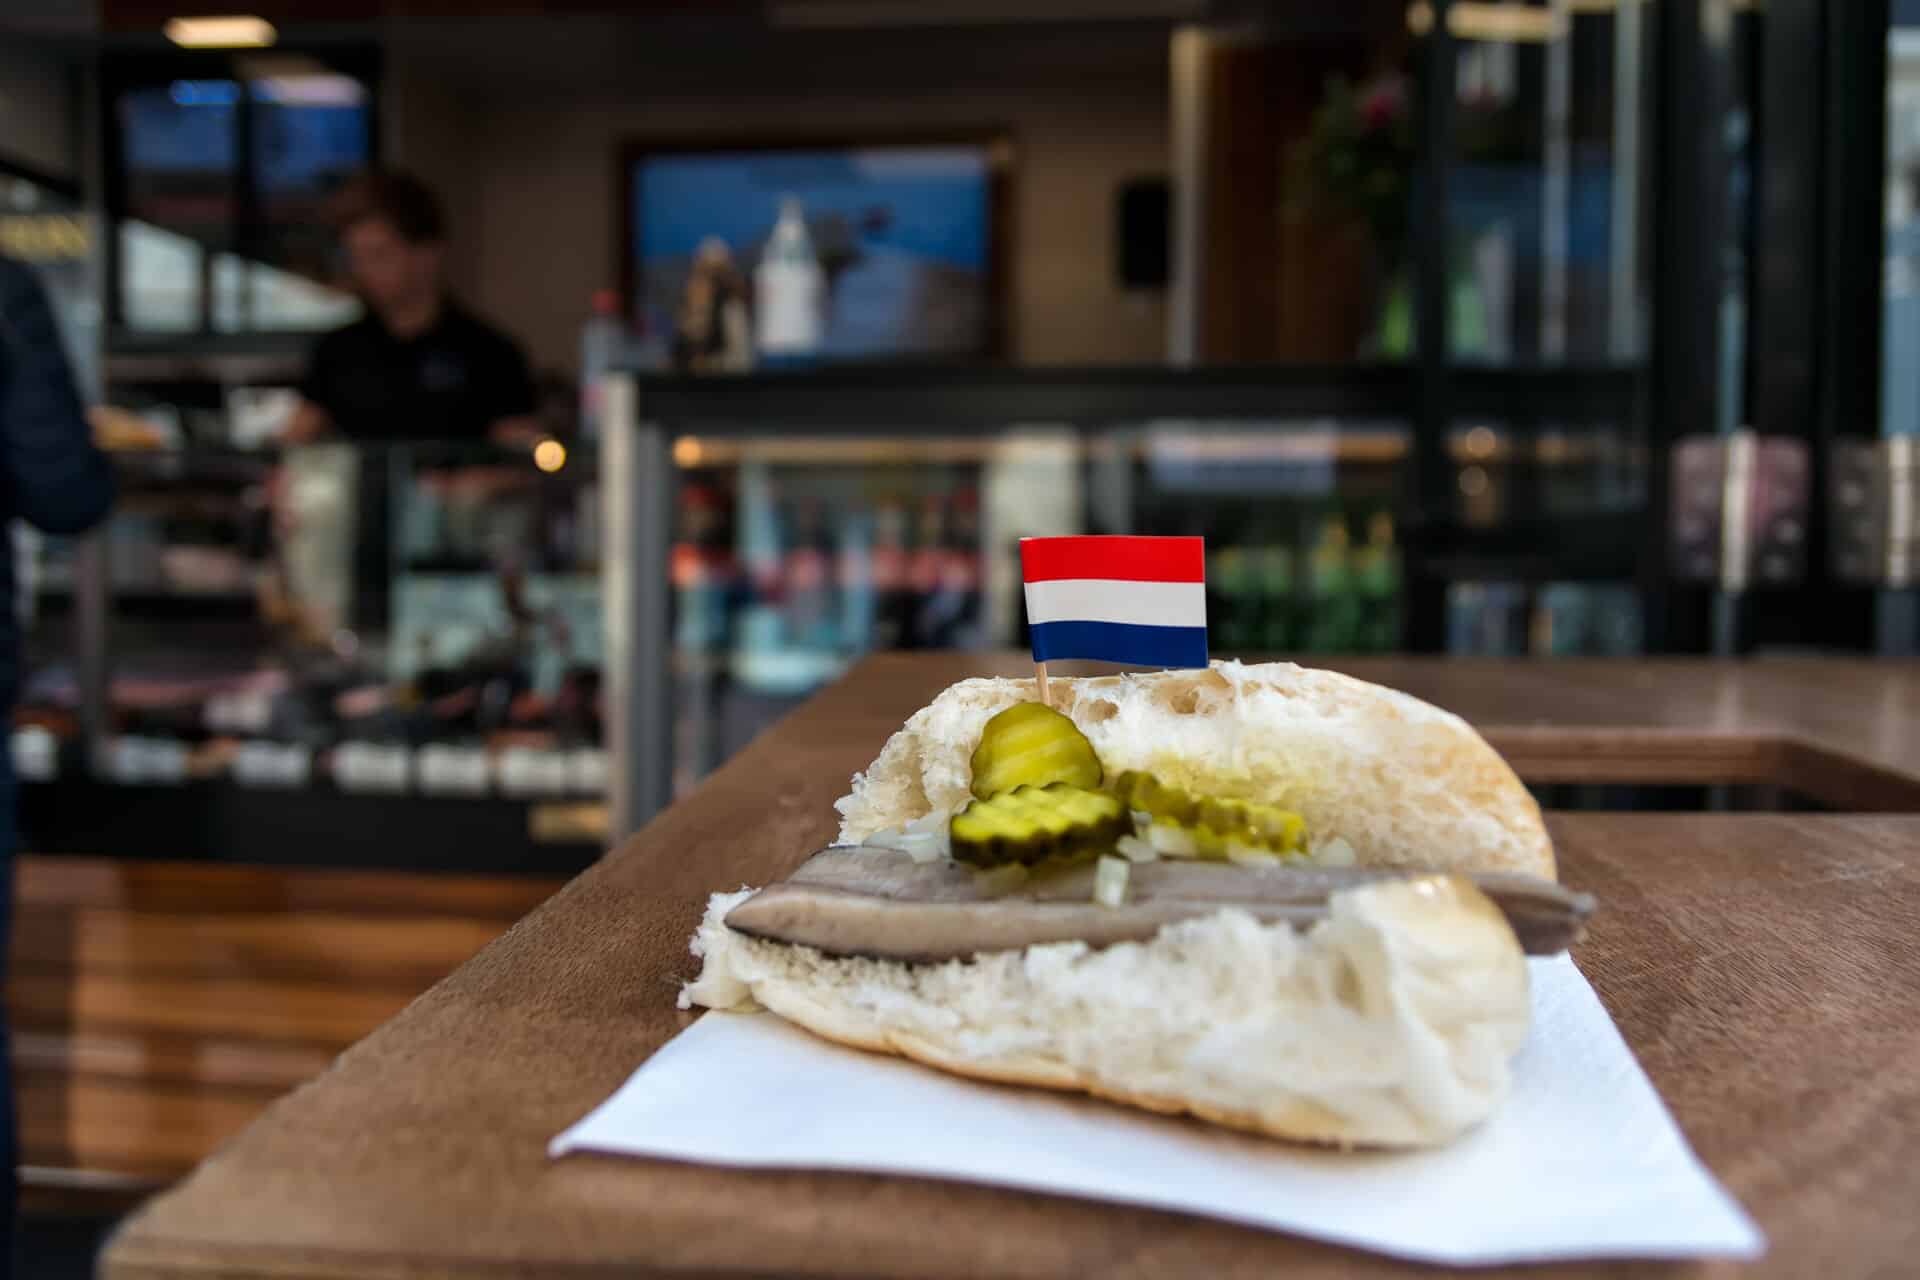 Traditional dutch snack, seafood sandwich with herring, onions and pickled cucumber. Broodje haring on the wooden table. With flag of Netherlands.